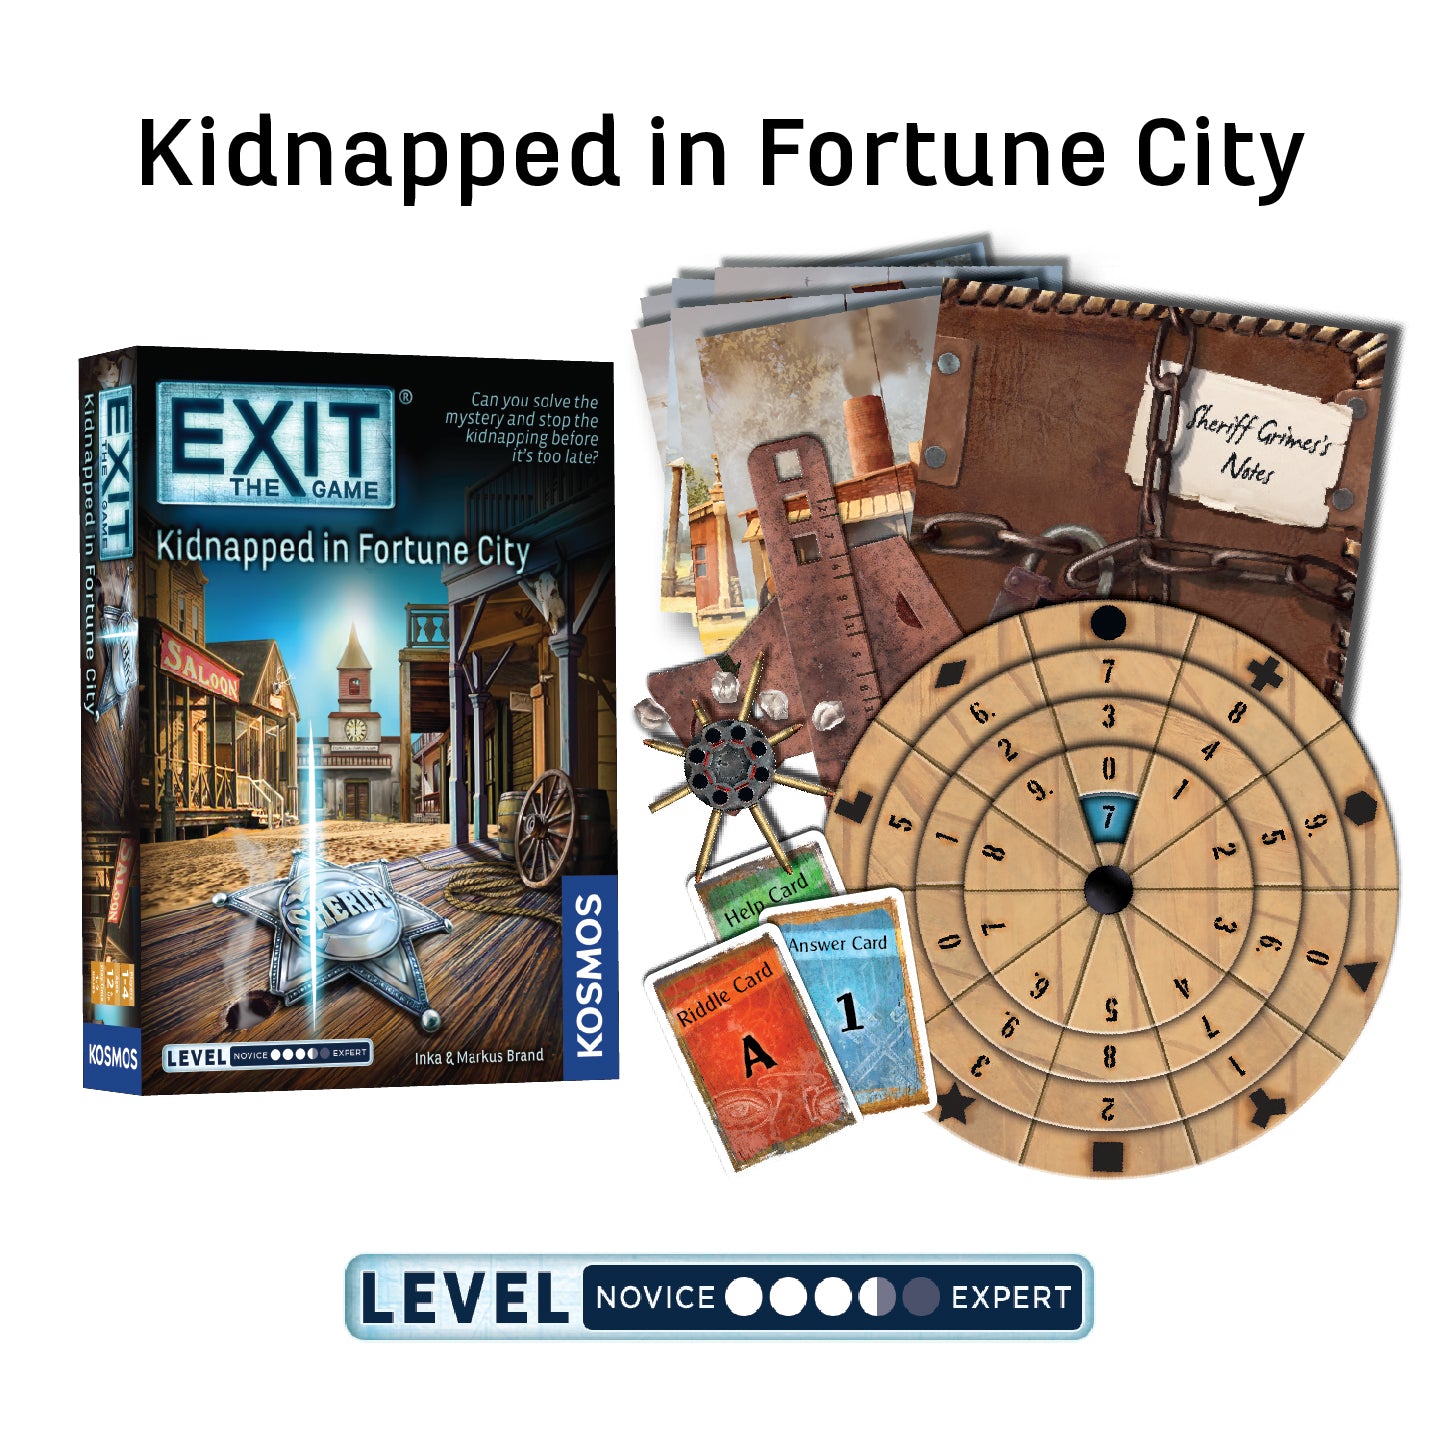 EXiT: Escape Room Card Game - Full Range of EXiT Games - New Titles for 2022